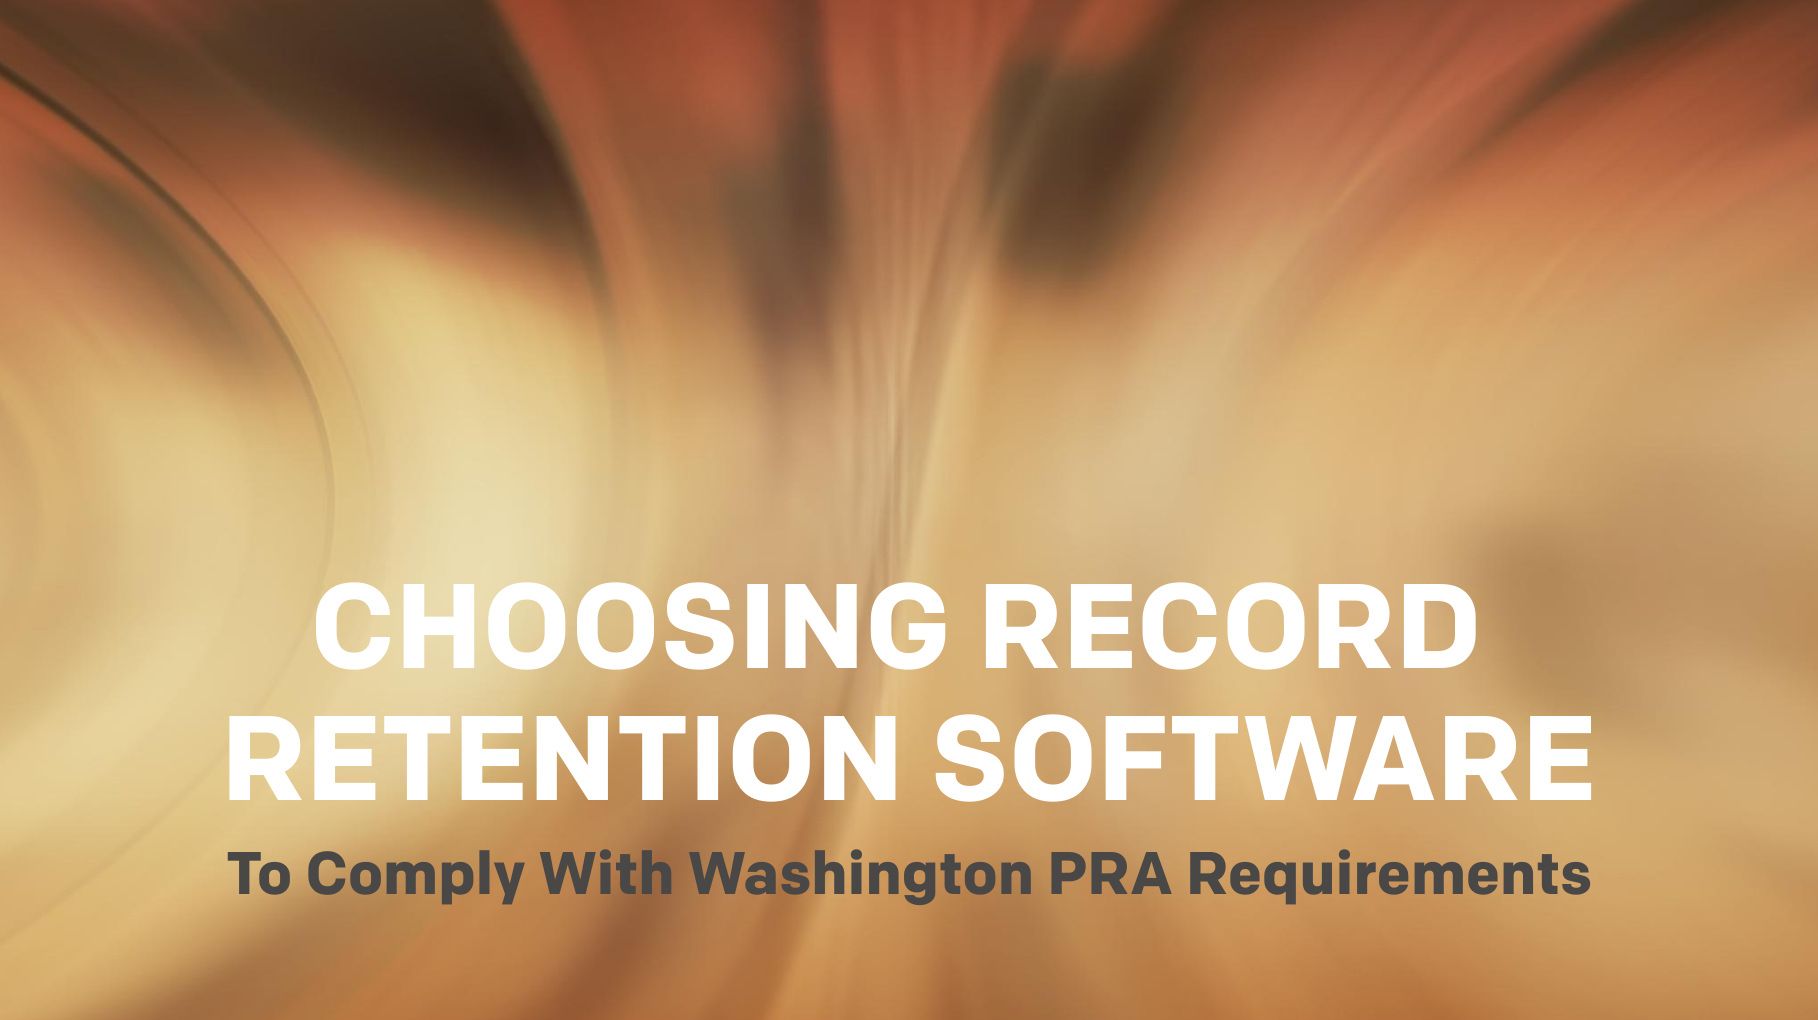 Record Retention Software To Comply With Washington PRA Requirements